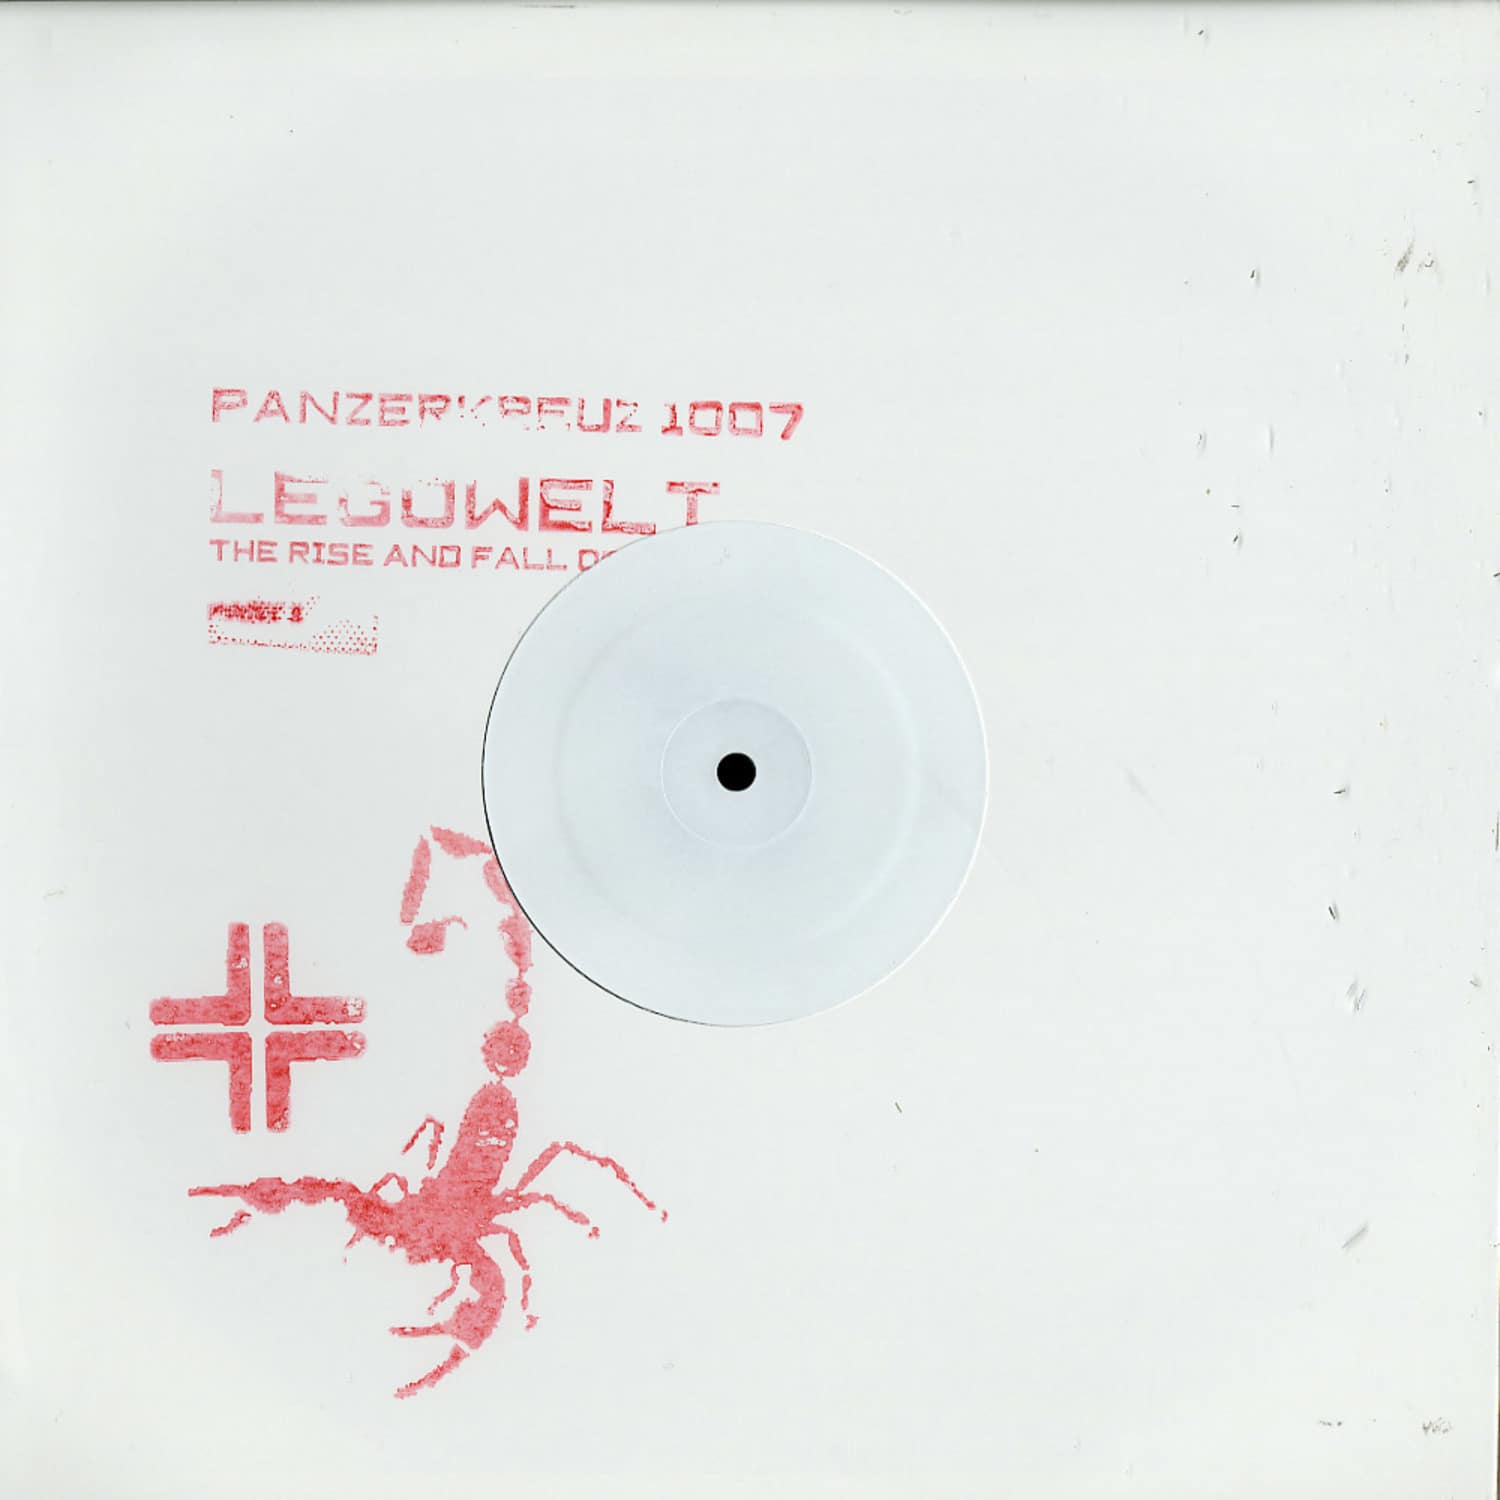 Legowelt - THE RISE AND FALL OF MANUEL NORIEGA PT. 2